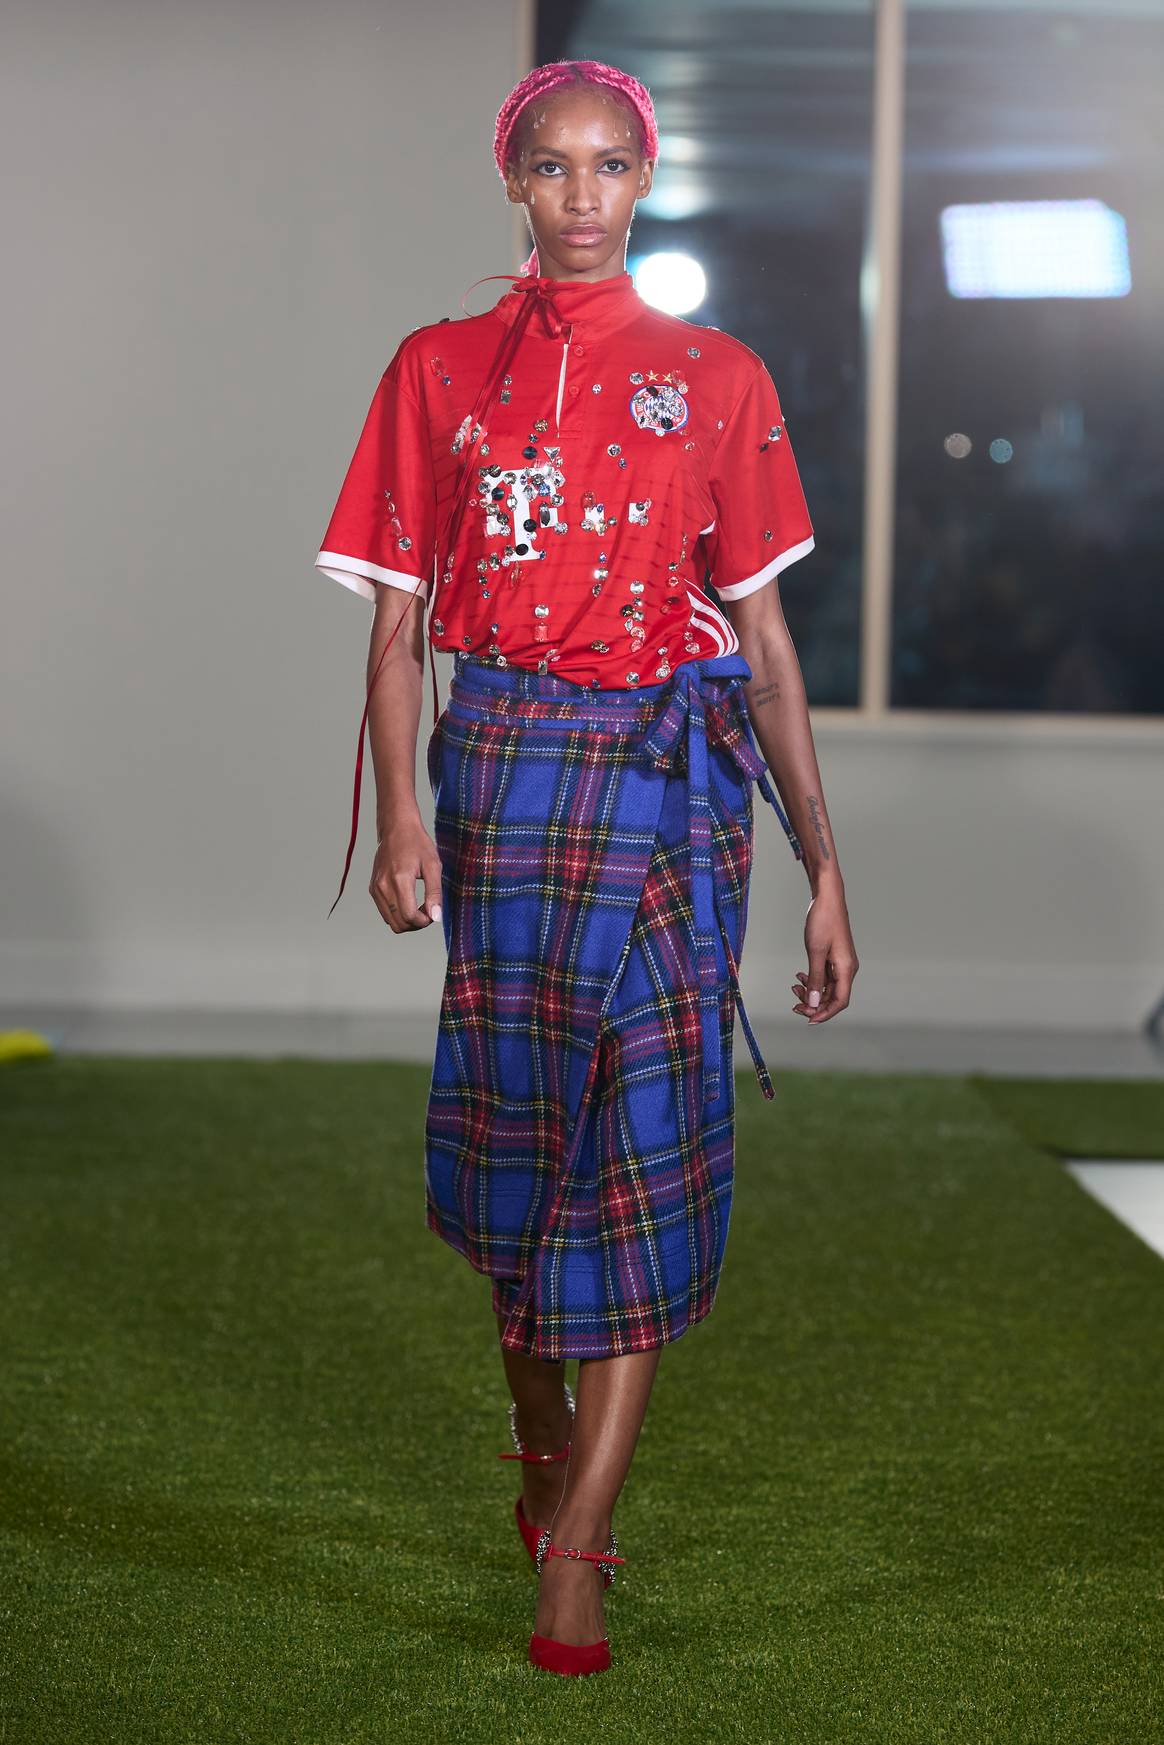 Image: Patrick McDowell; 'Cinderella Shall go to the Football' AW23